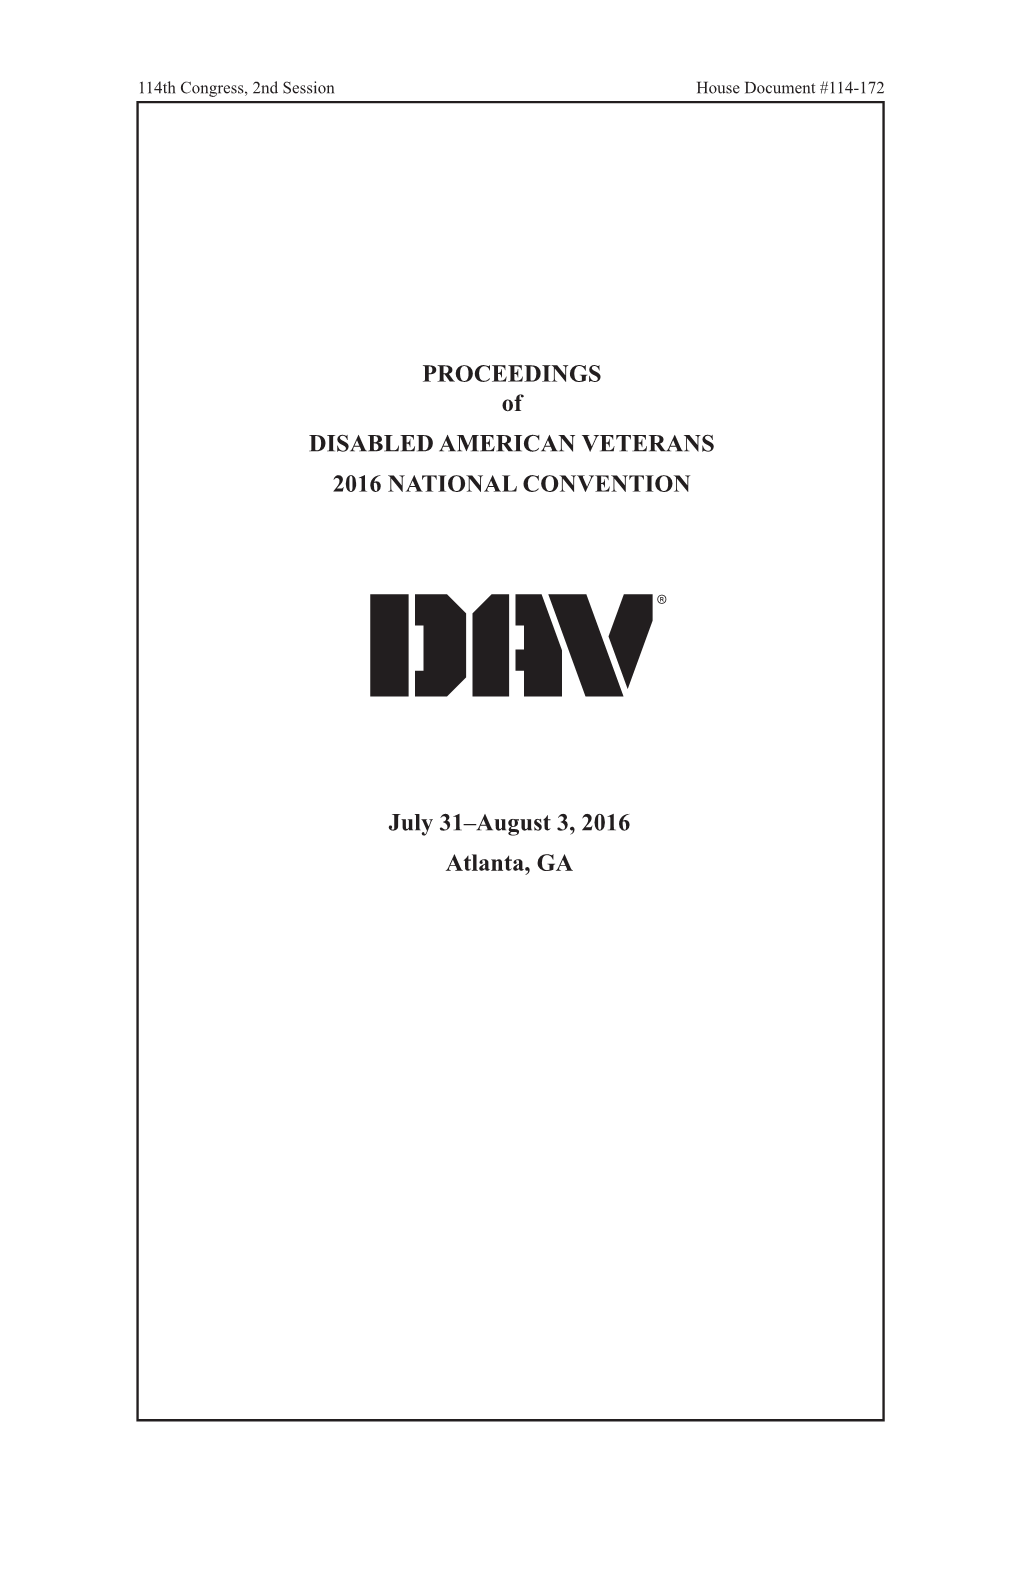 PROCEEDINGS of DISABLED AMERICAN VETERANS 2016 NATIONAL CONVENTION